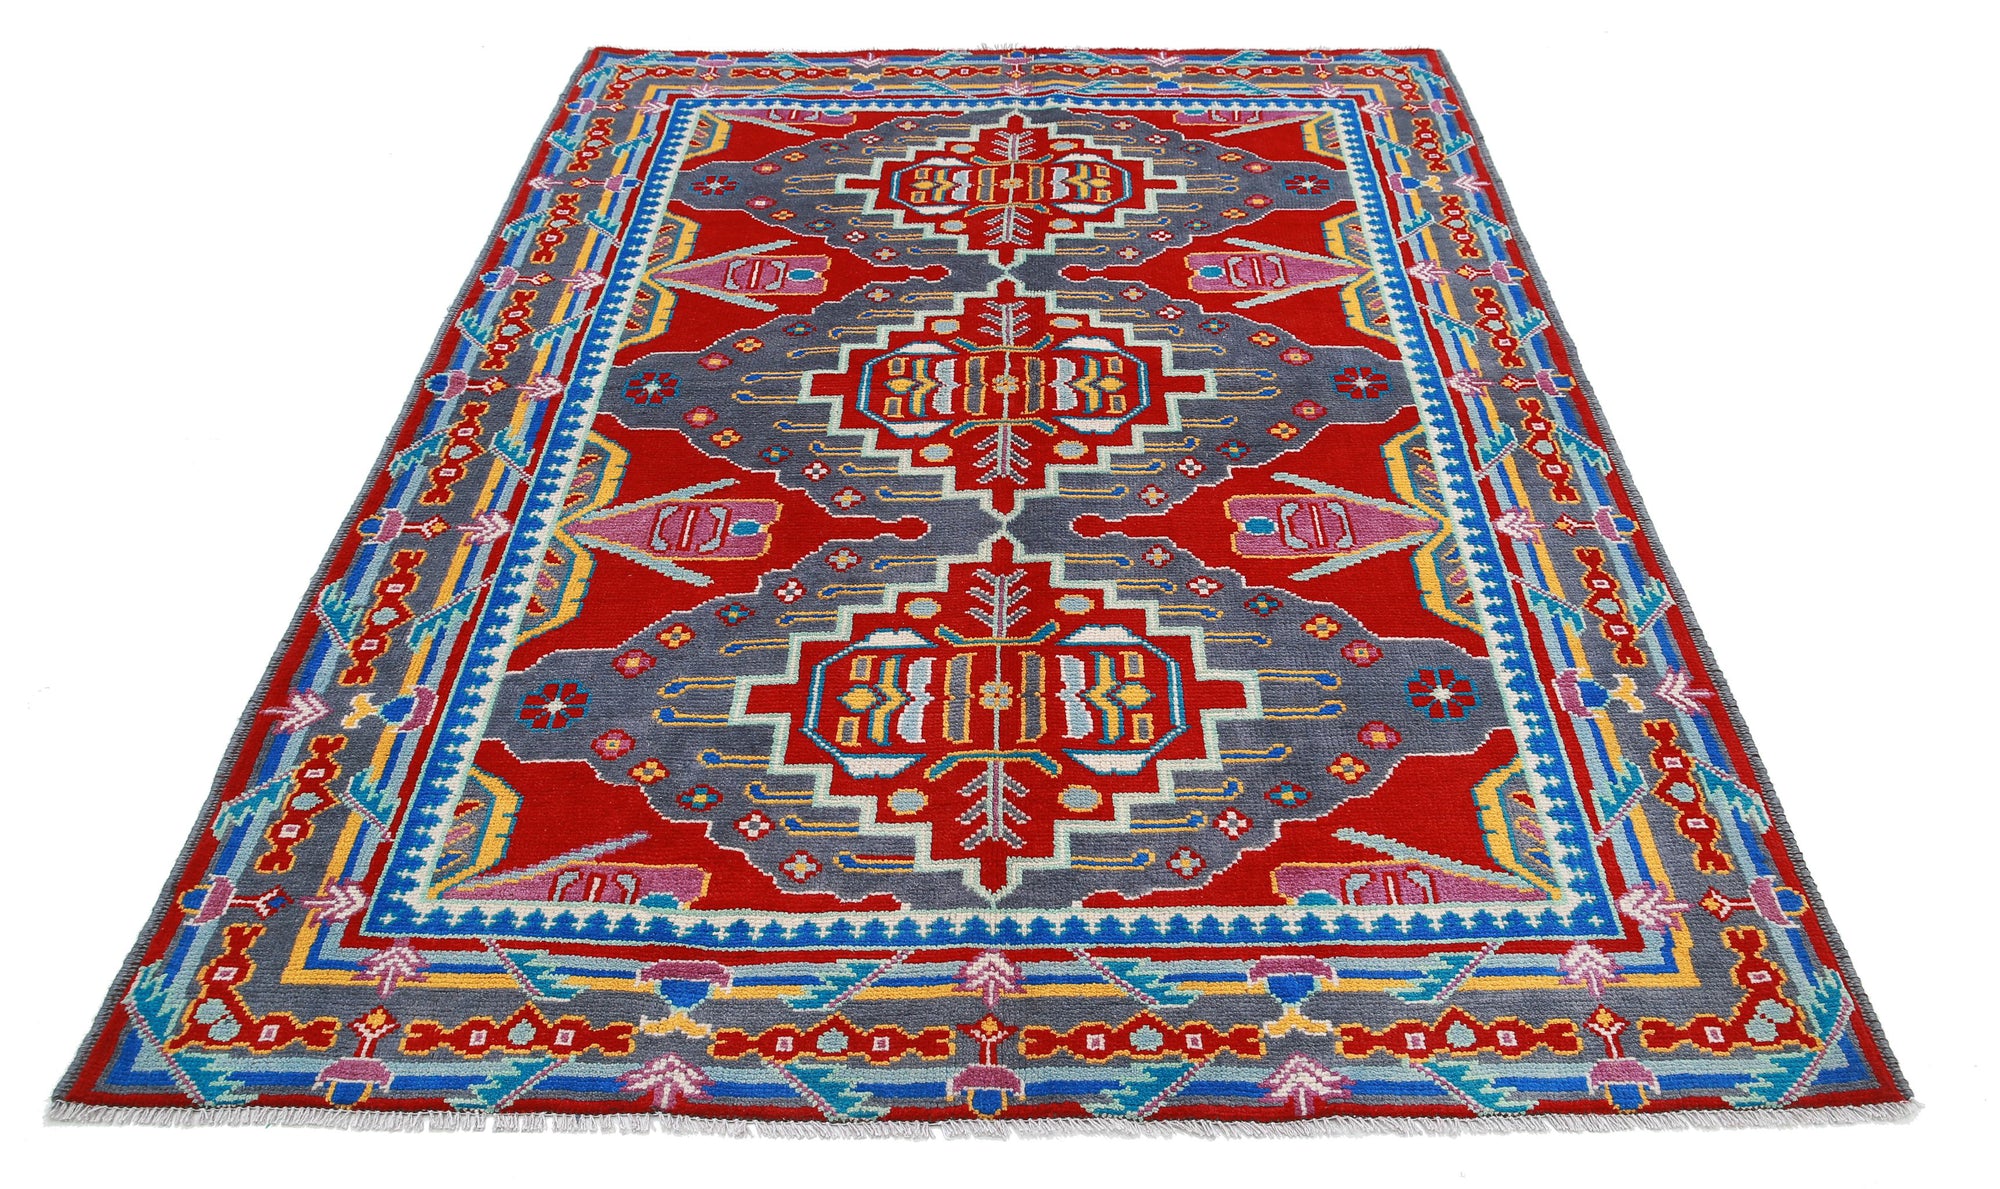 Revival-hand-knotted-qarghani-wool-rug-5014224-3.jpg